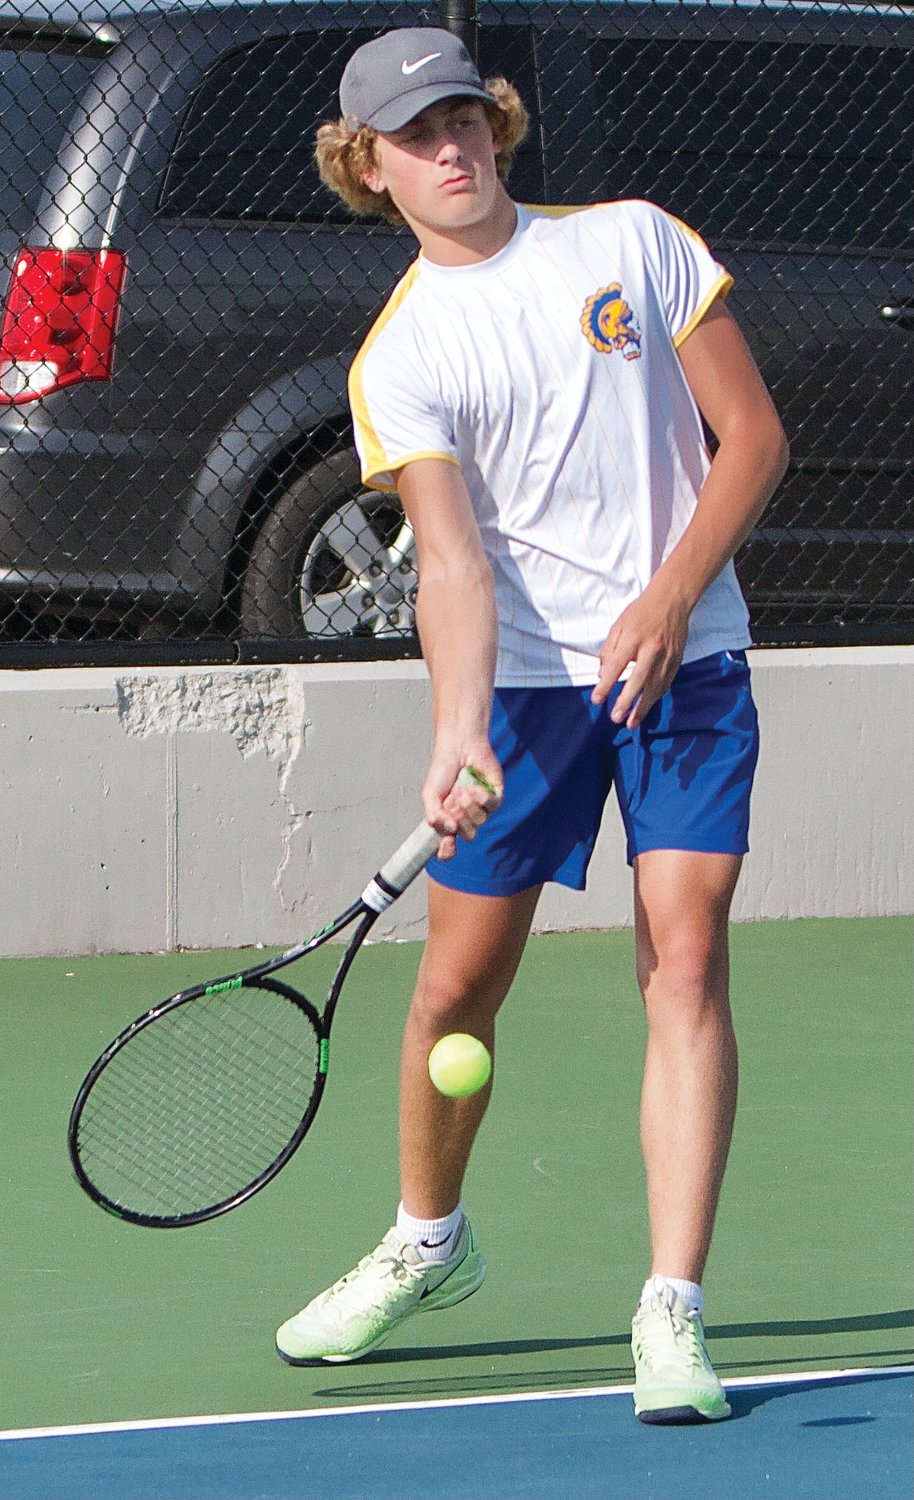 Crawfordsville freshman Wyatt Motz returns a shot at North Montgomery on Monday in a 4-1 Athenian win over the Chargers.